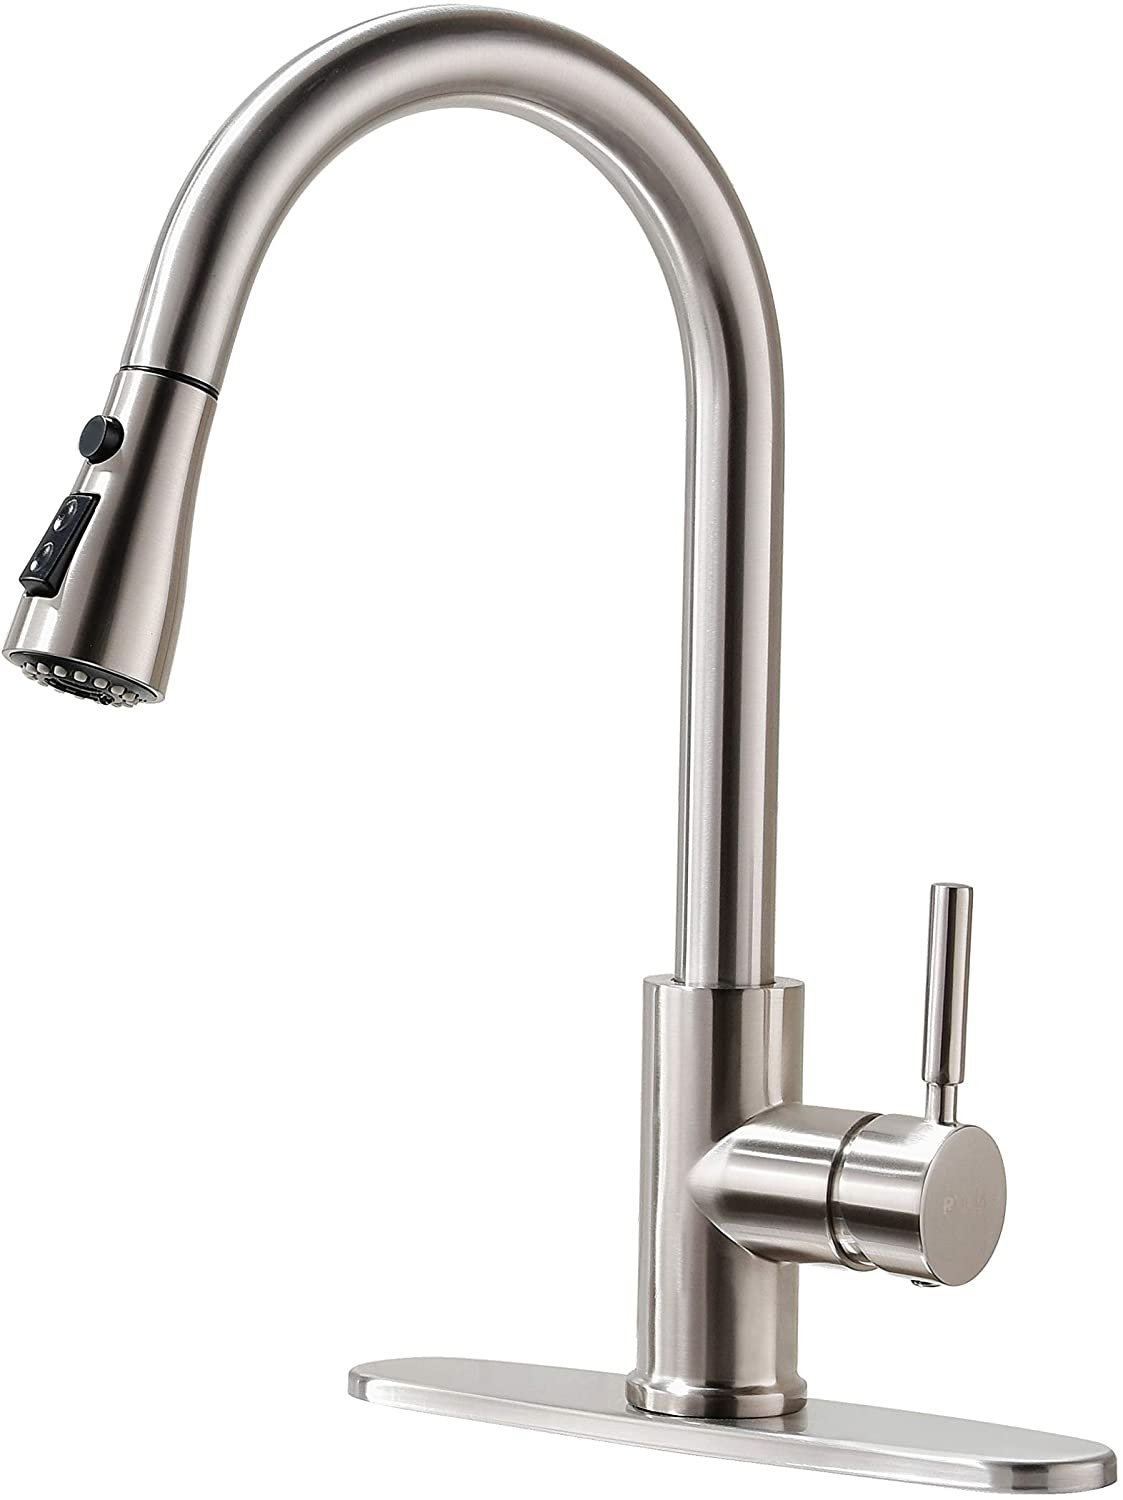 Top 10 Best Kitchen Faucets for Hard Water of 2022 Reviewed